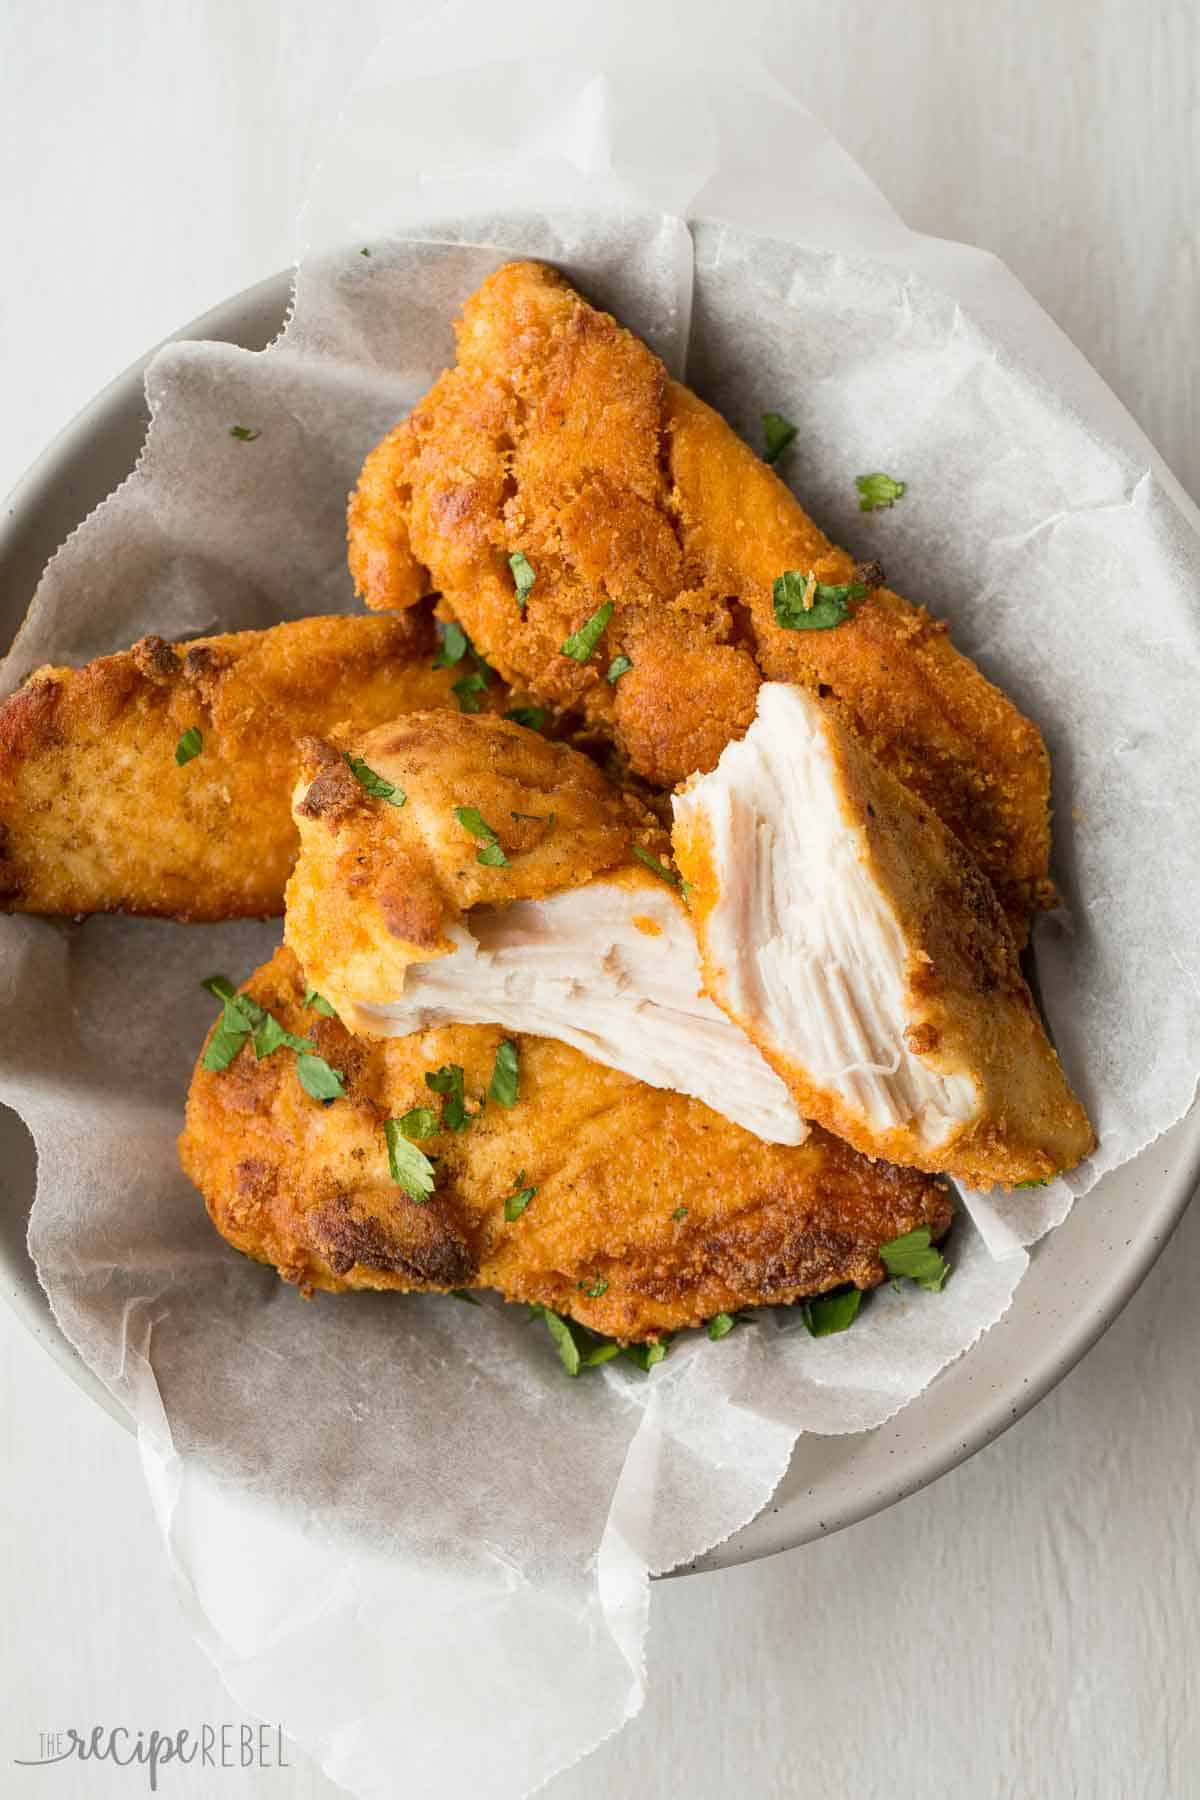 oven fried chicken pieces in grey bowl on parchment paper with one piece broken in half